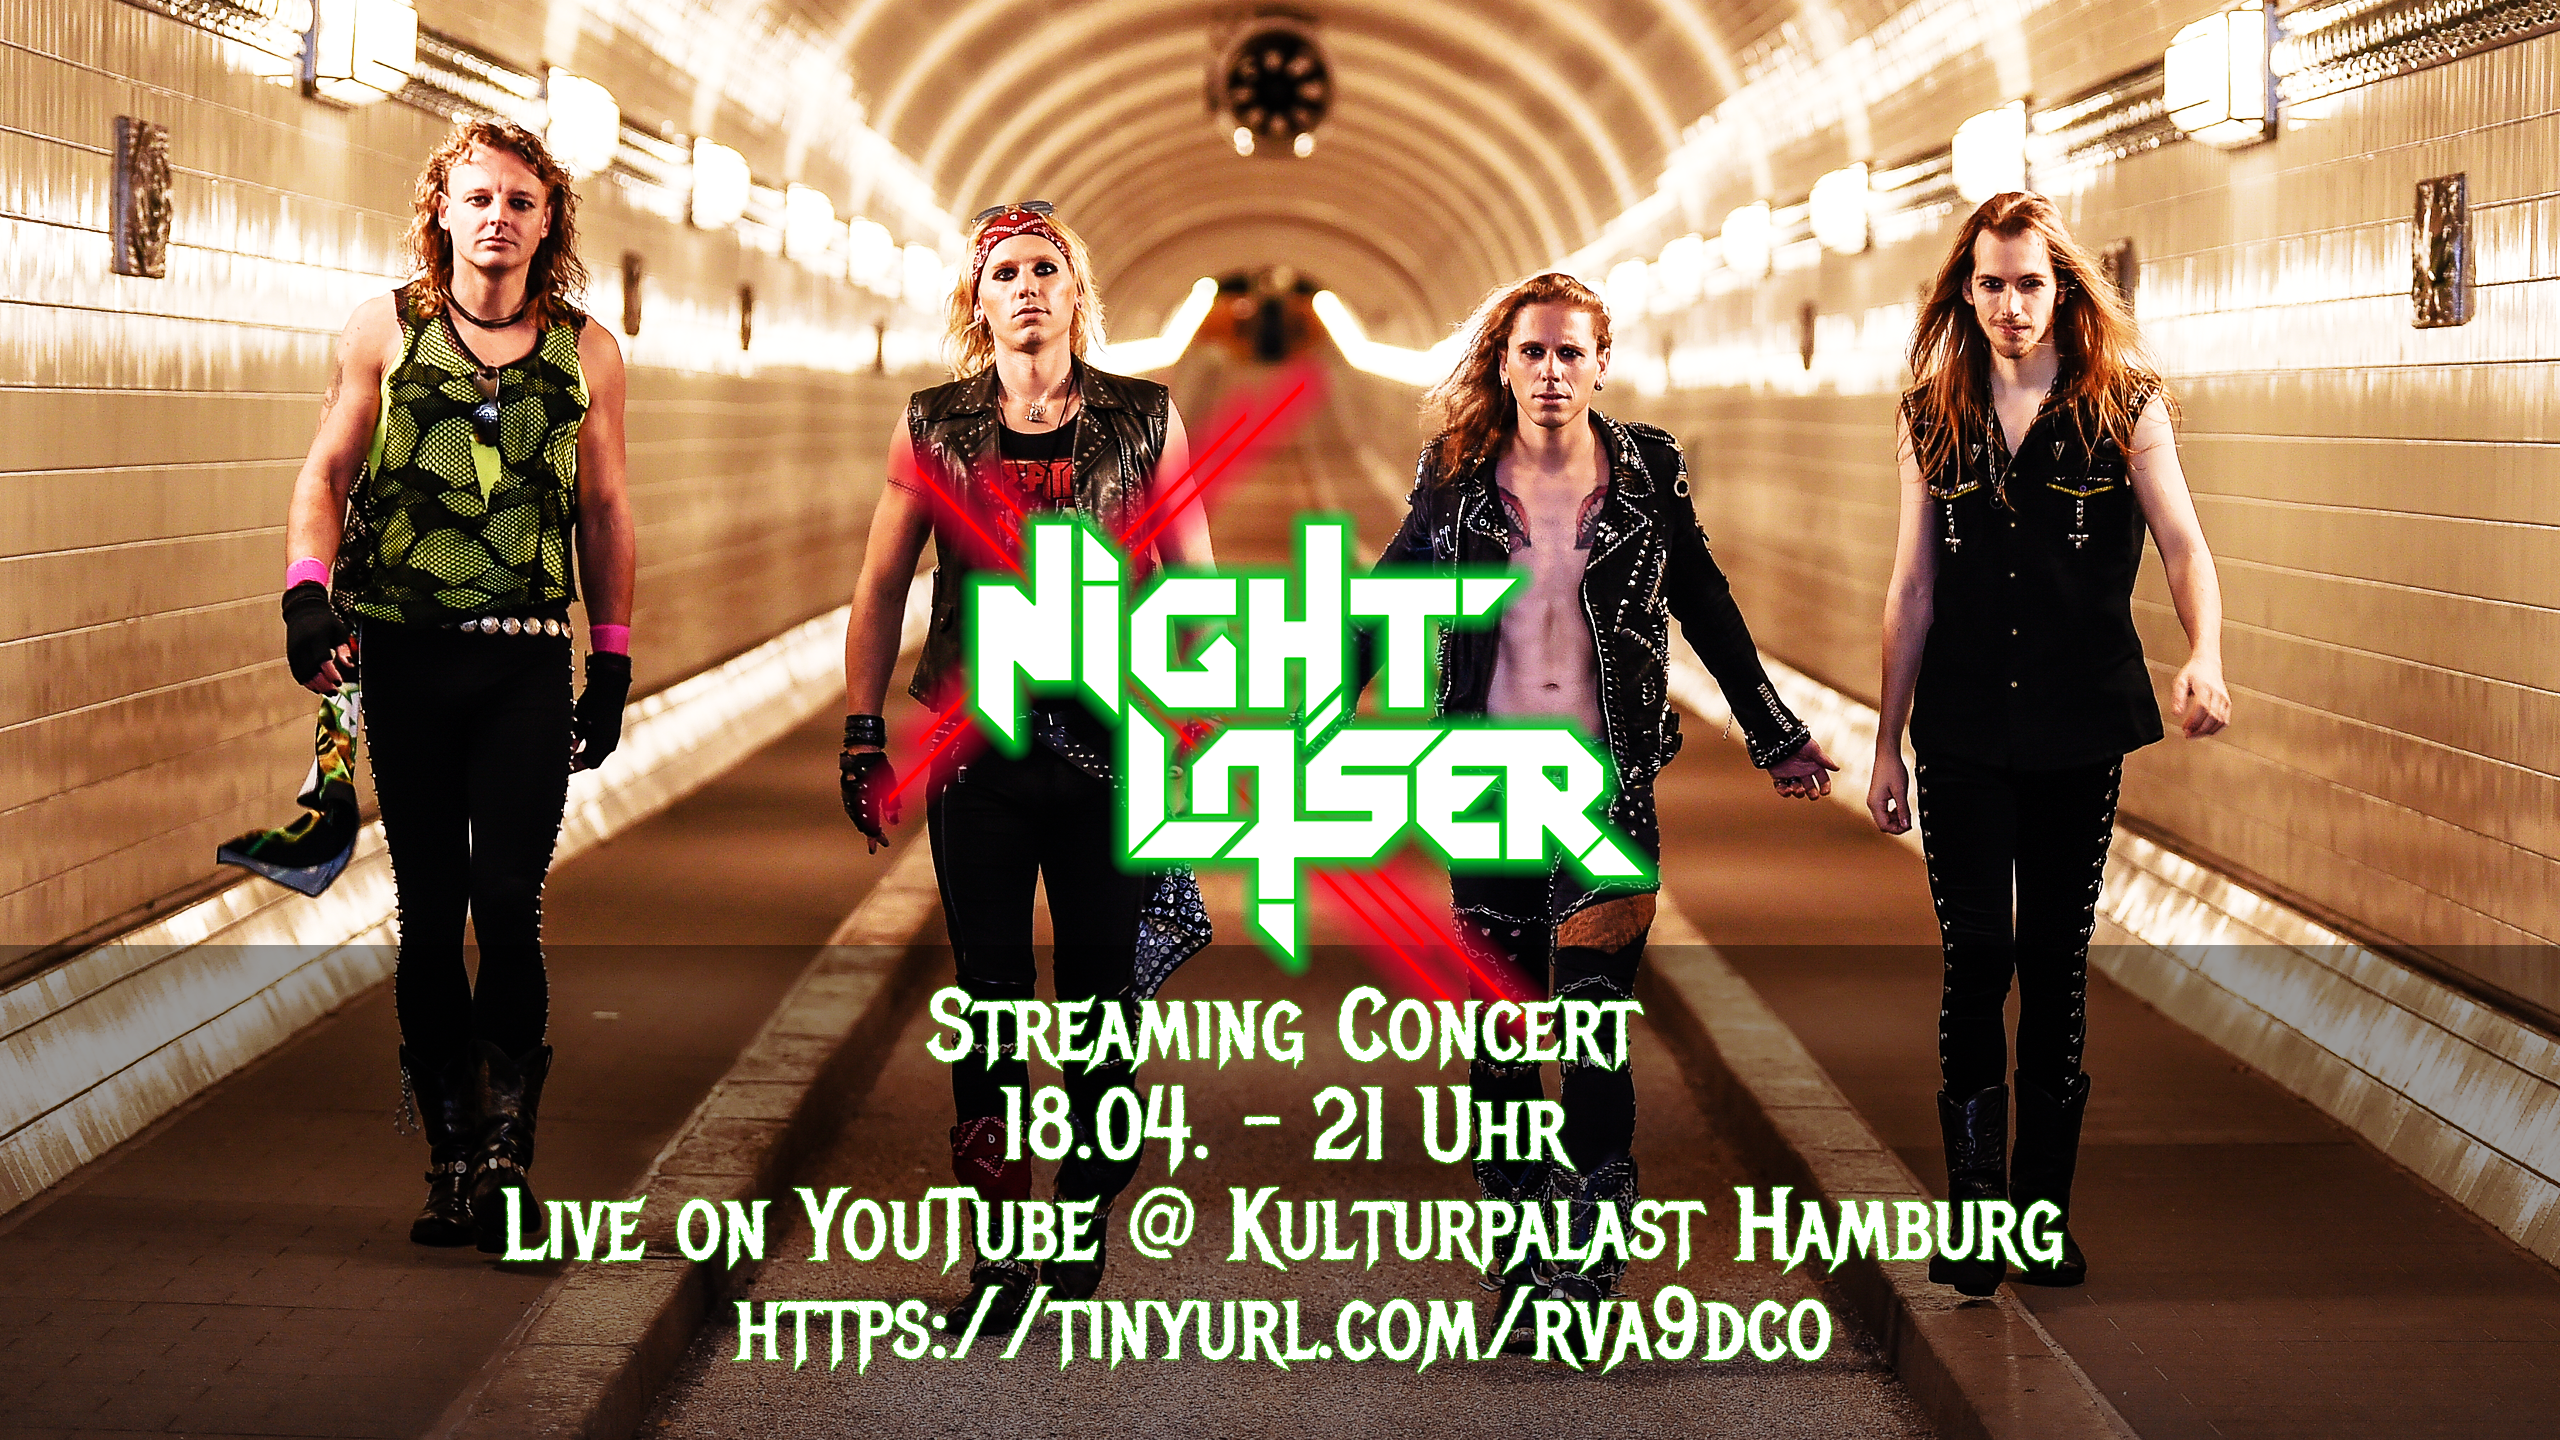 Stay at Home! Live-Streaming-Show at 18.04. – 21 Uhr